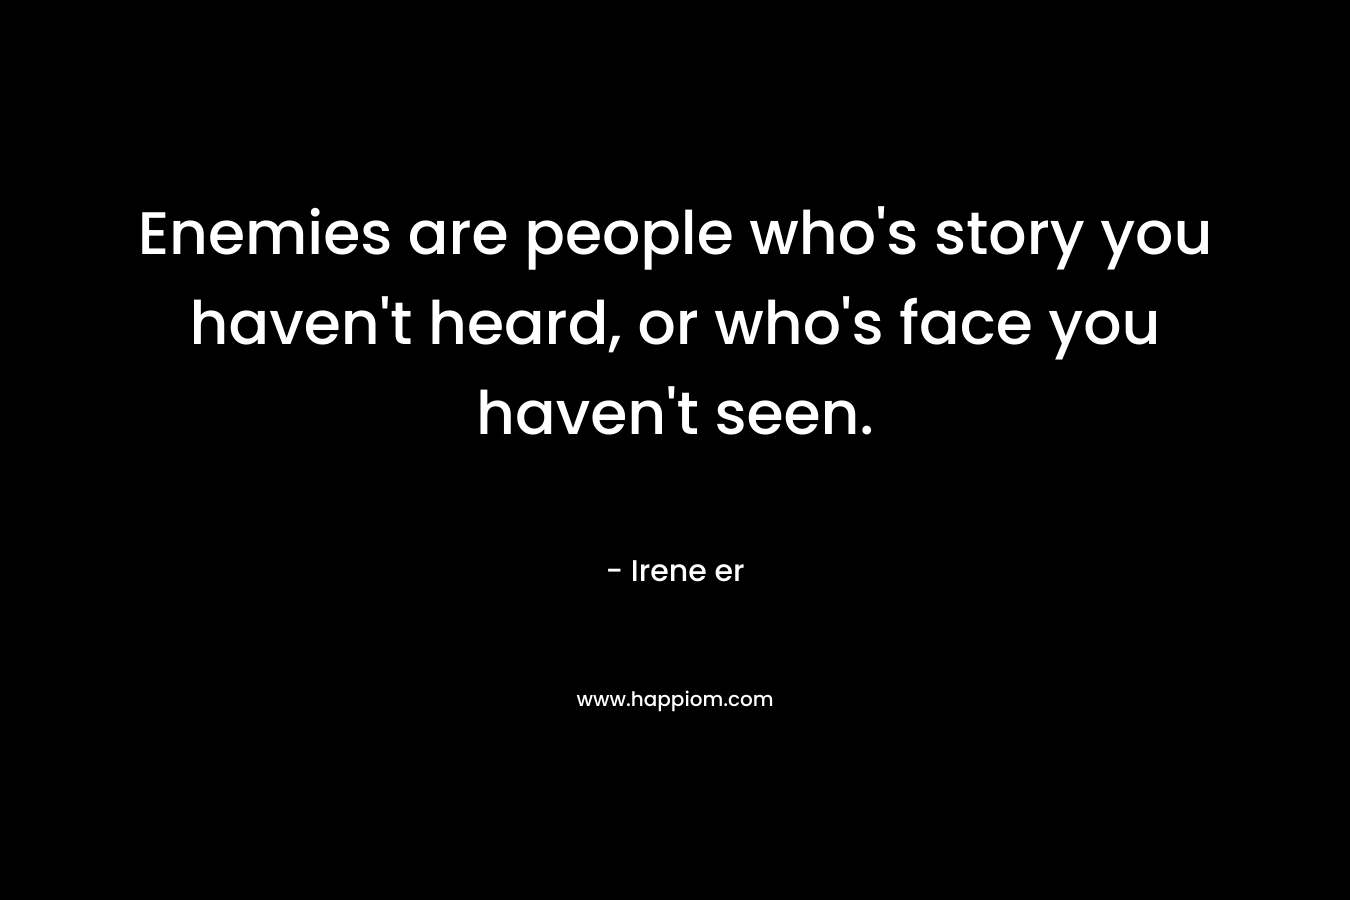 Enemies are people who's story you haven't heard, or who's face you haven't seen.